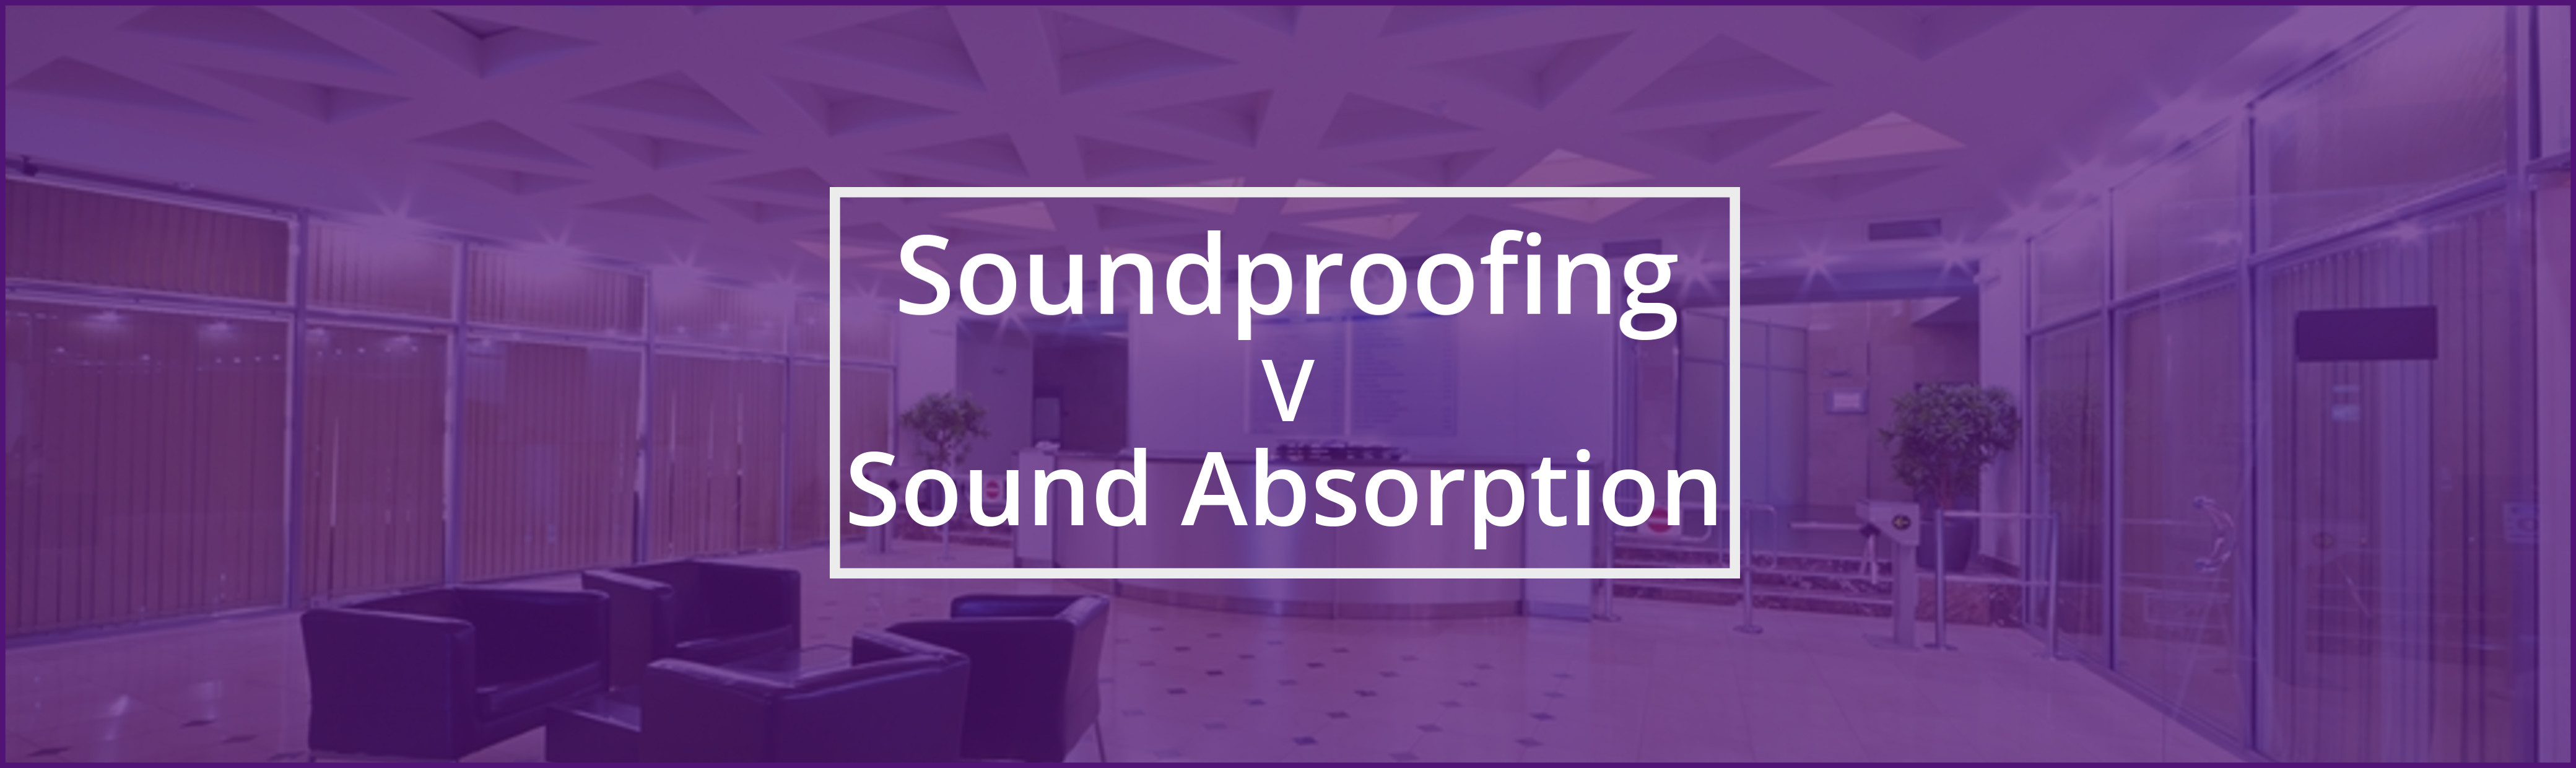 Soundproofing vs Sound Absorption